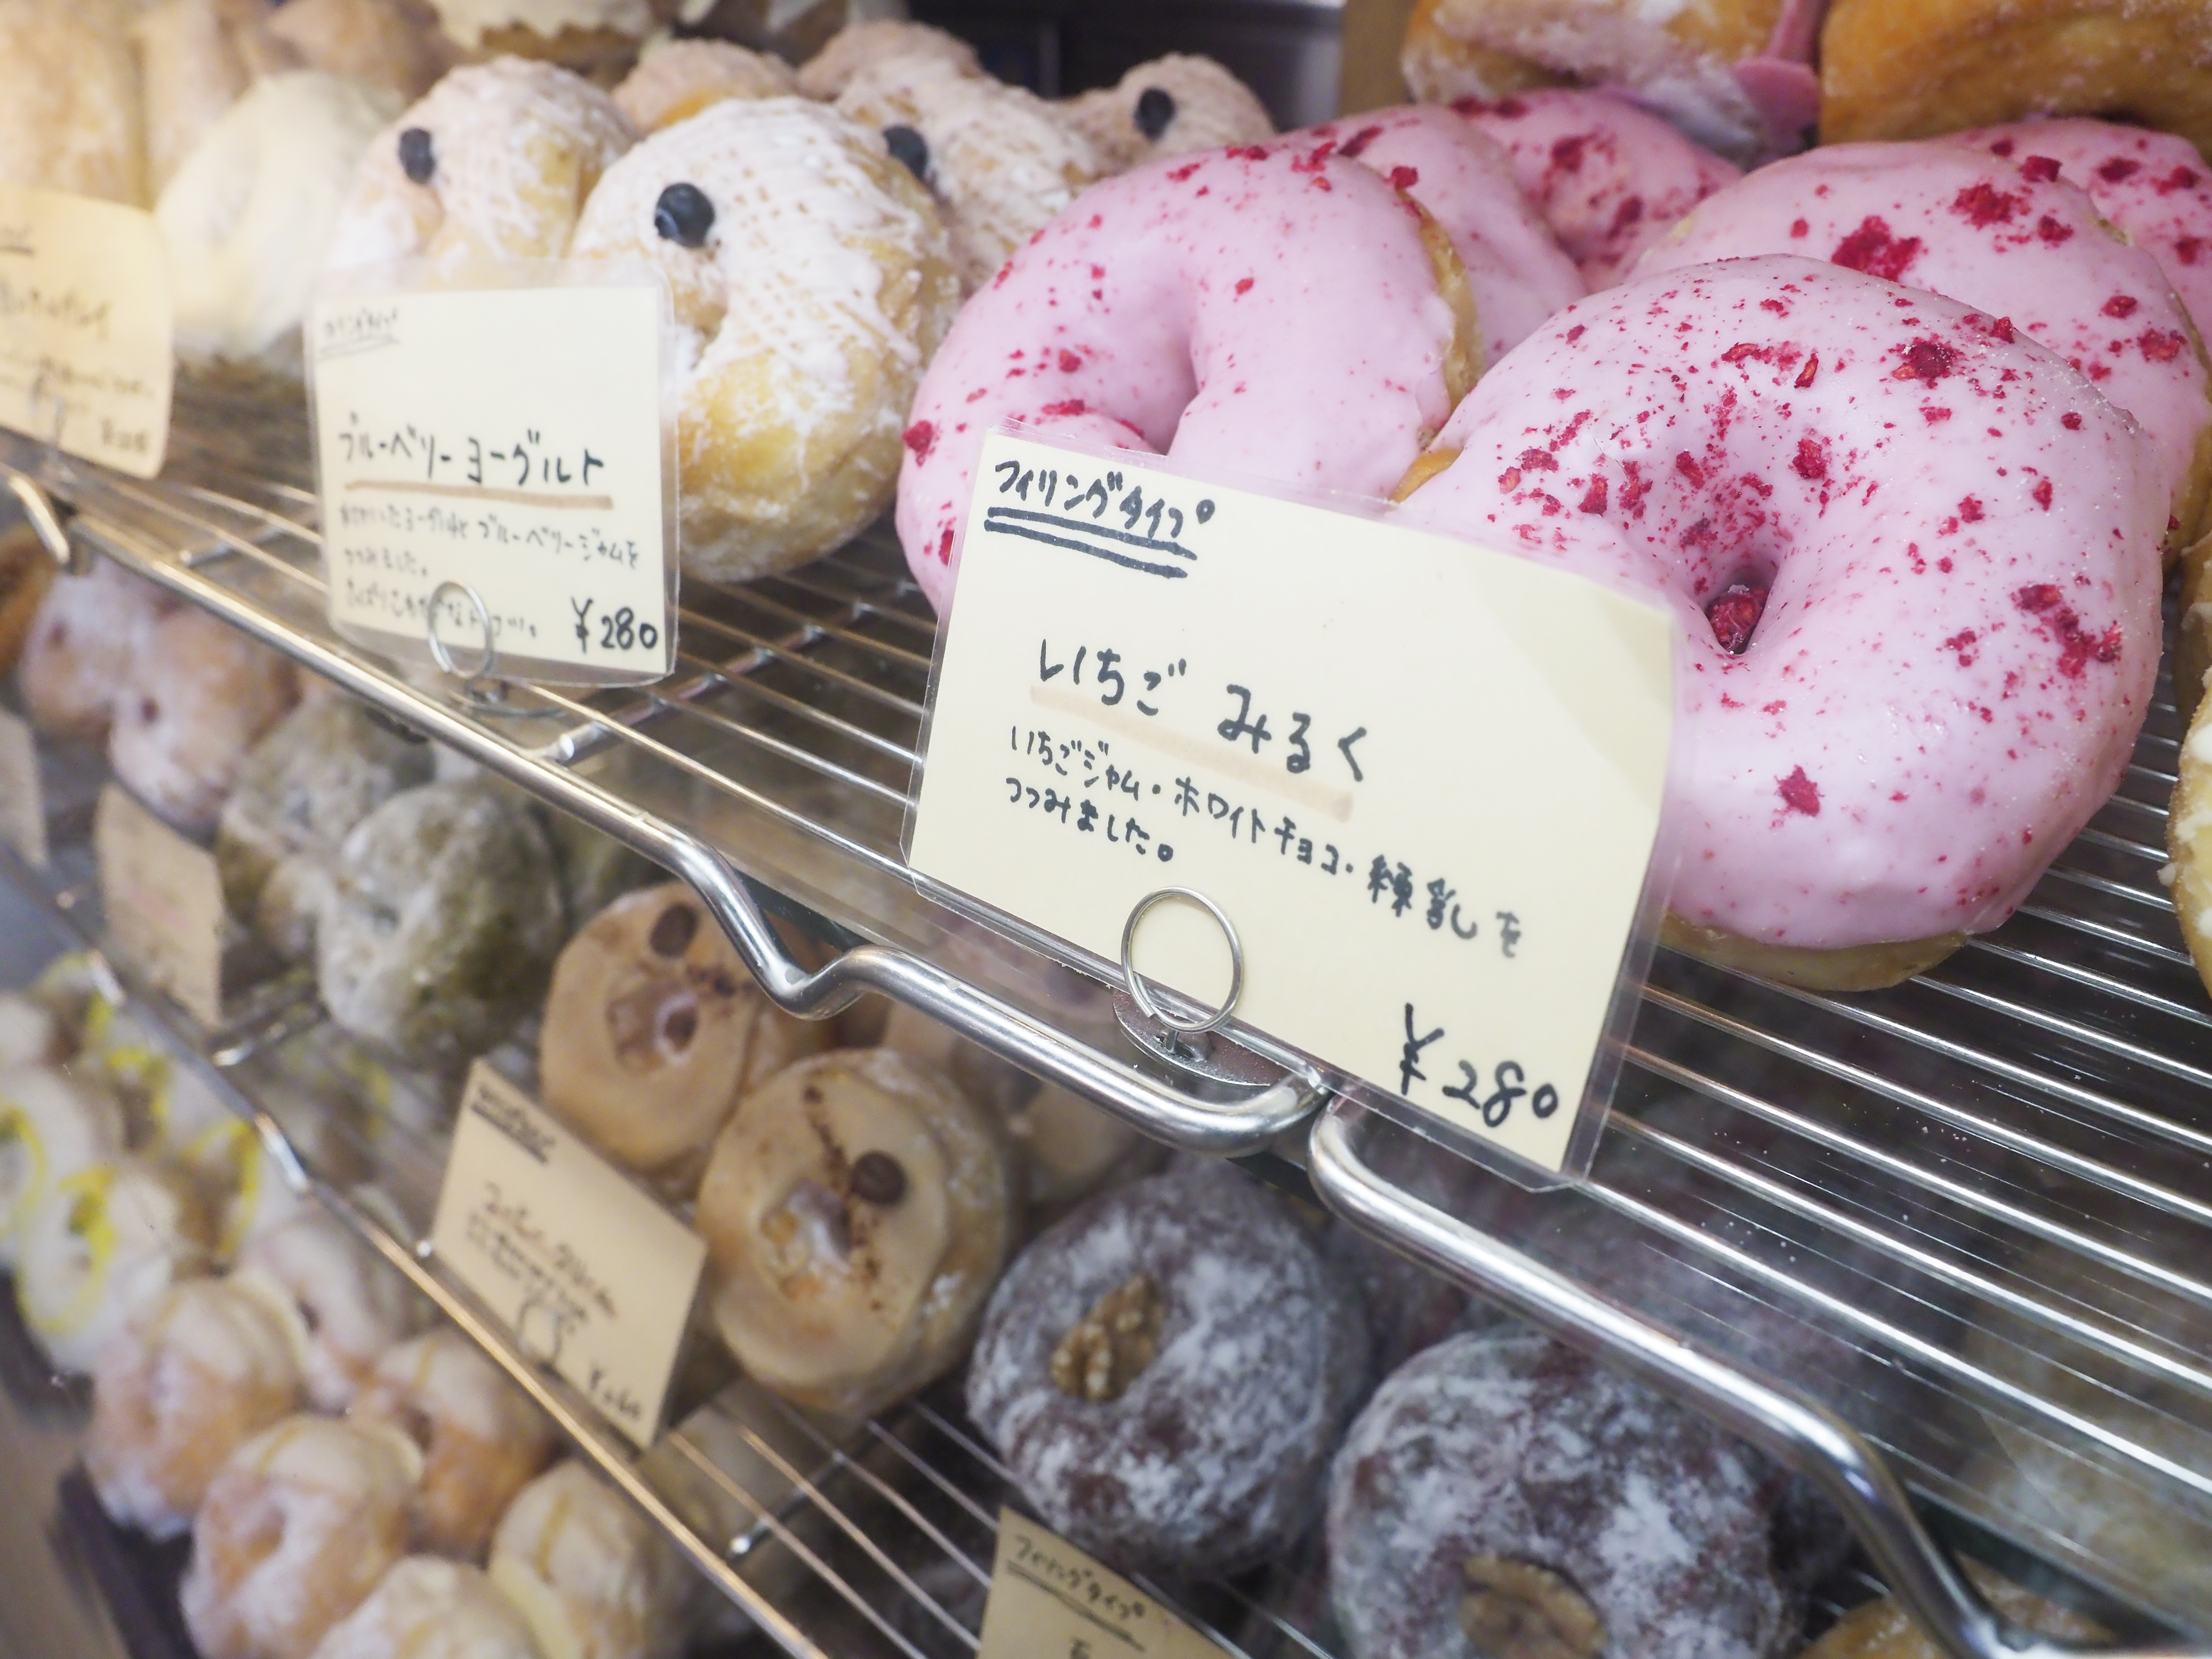 Misaki Donuts Zushi Store: Handmade with a variety of flavors